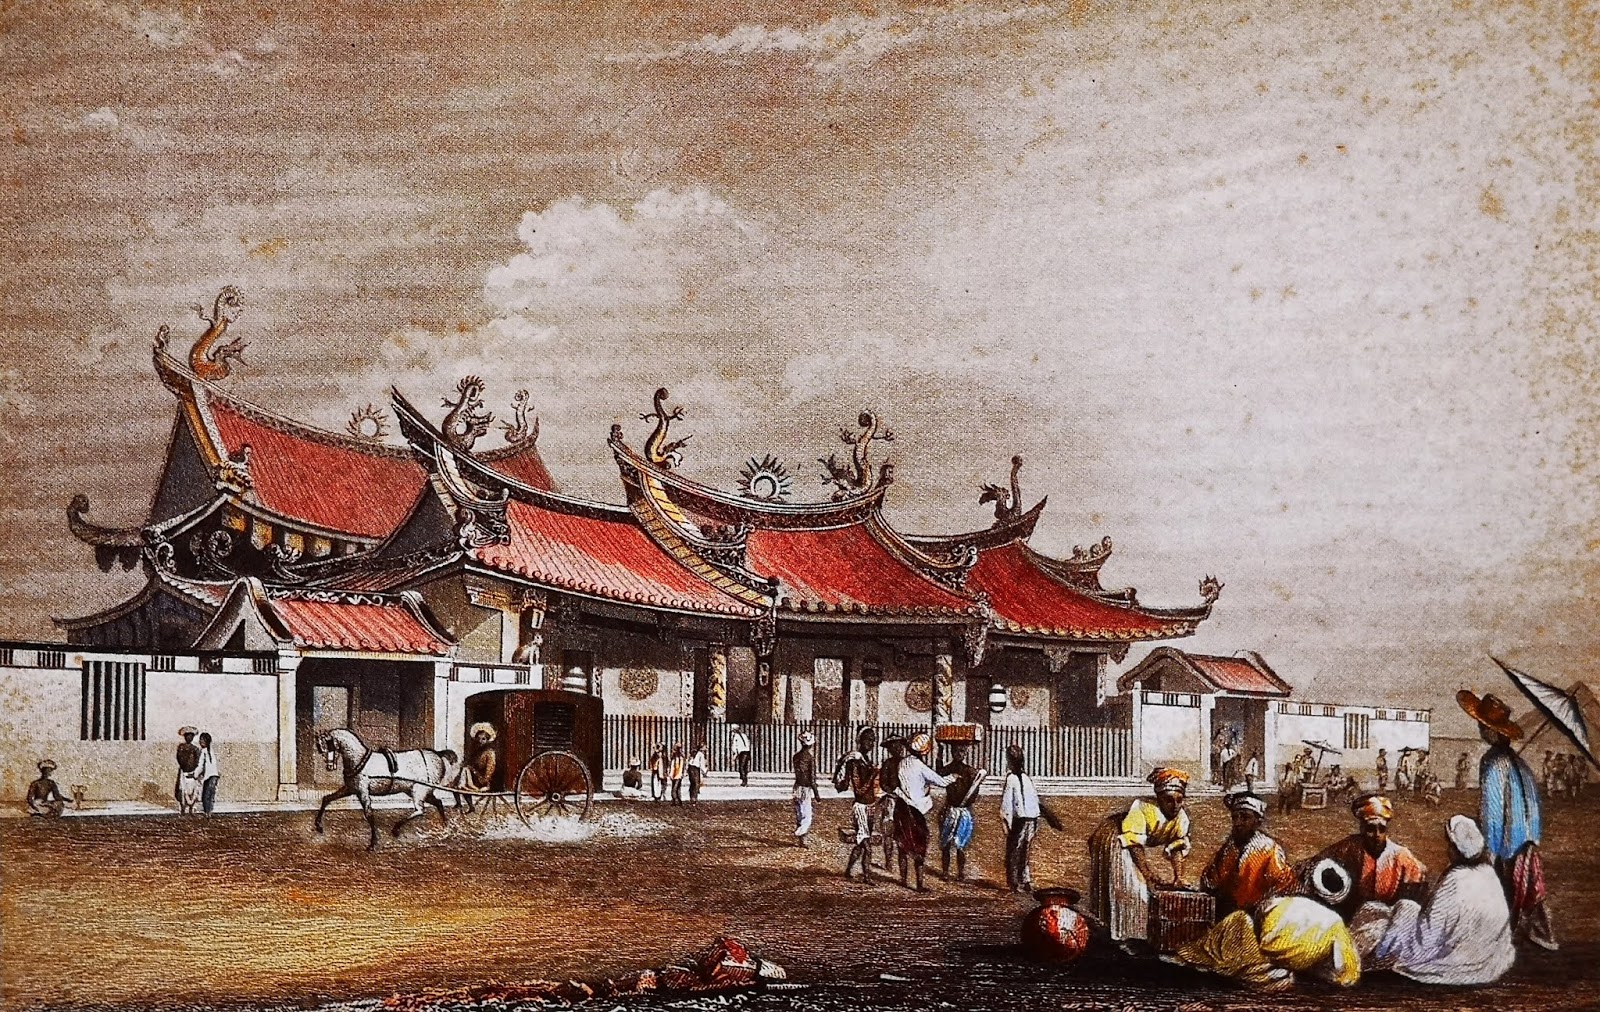 Thian Hock Keng Temple: A Symbol of Singapore's Rich Cultural Heritage